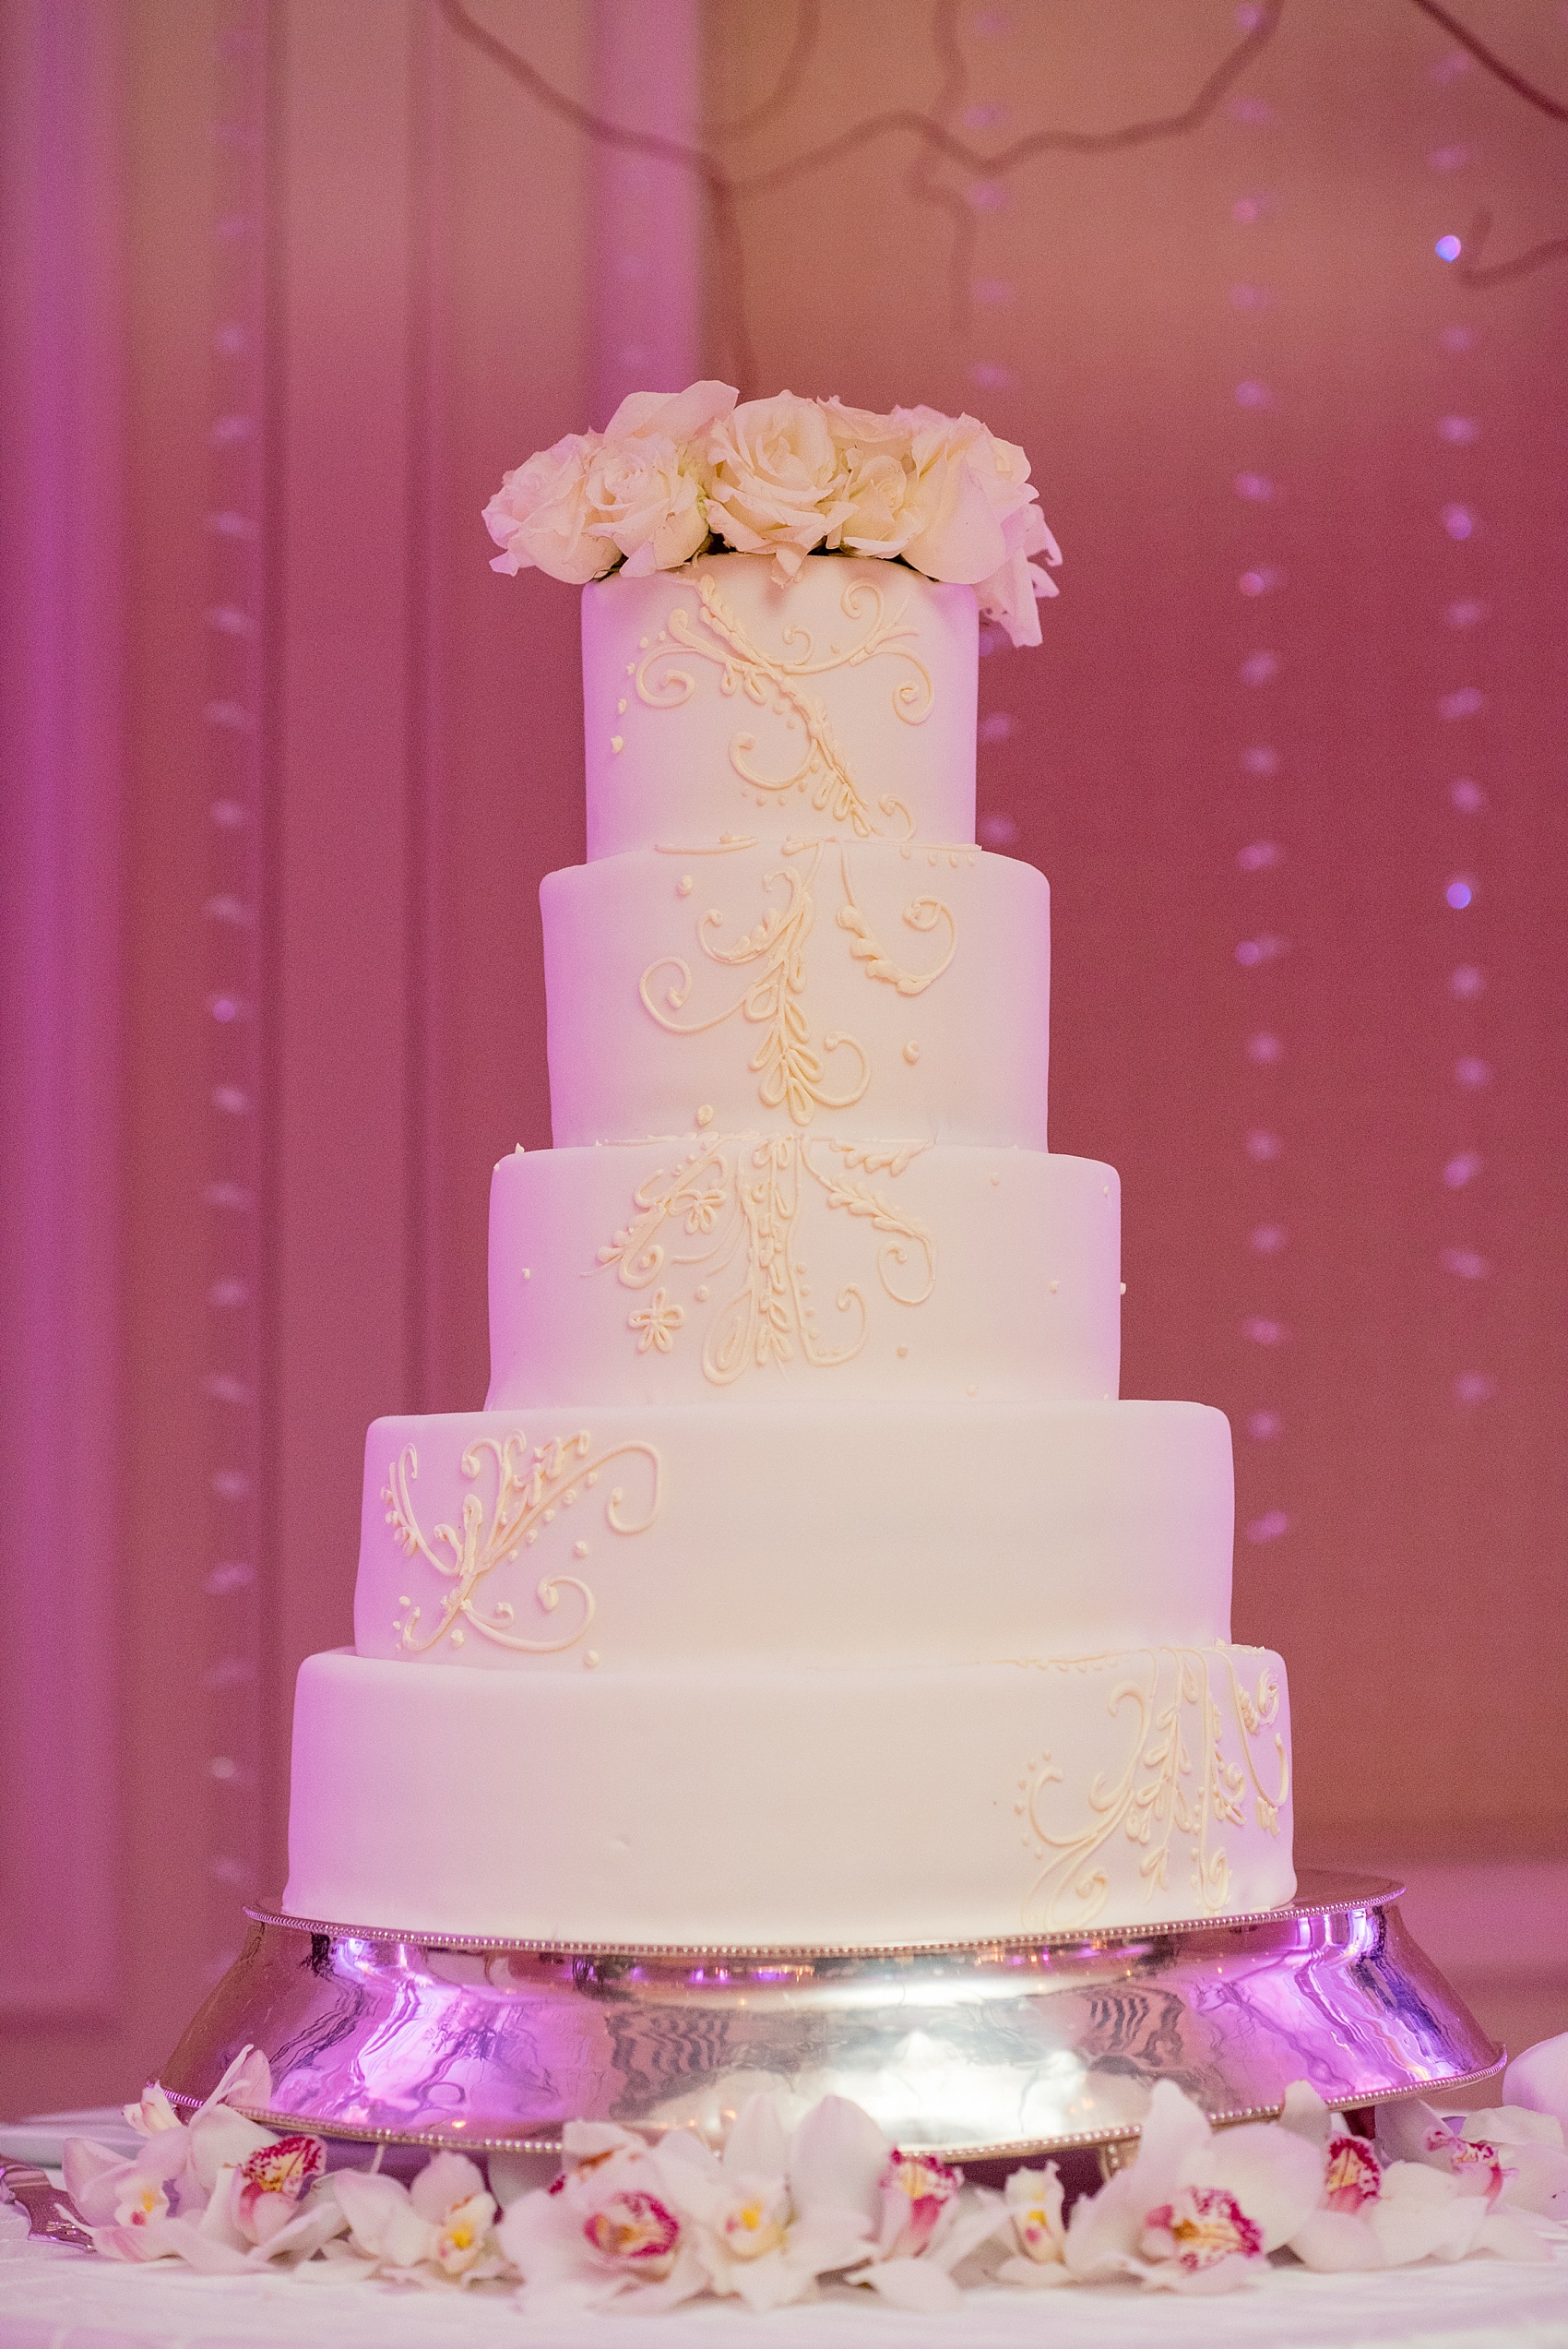 Washington, DC wedding photos by Mikkel Paige. Their cake was an all white 5 tier cake with swirl piping at the Ritz Carlton, Pentagon City.